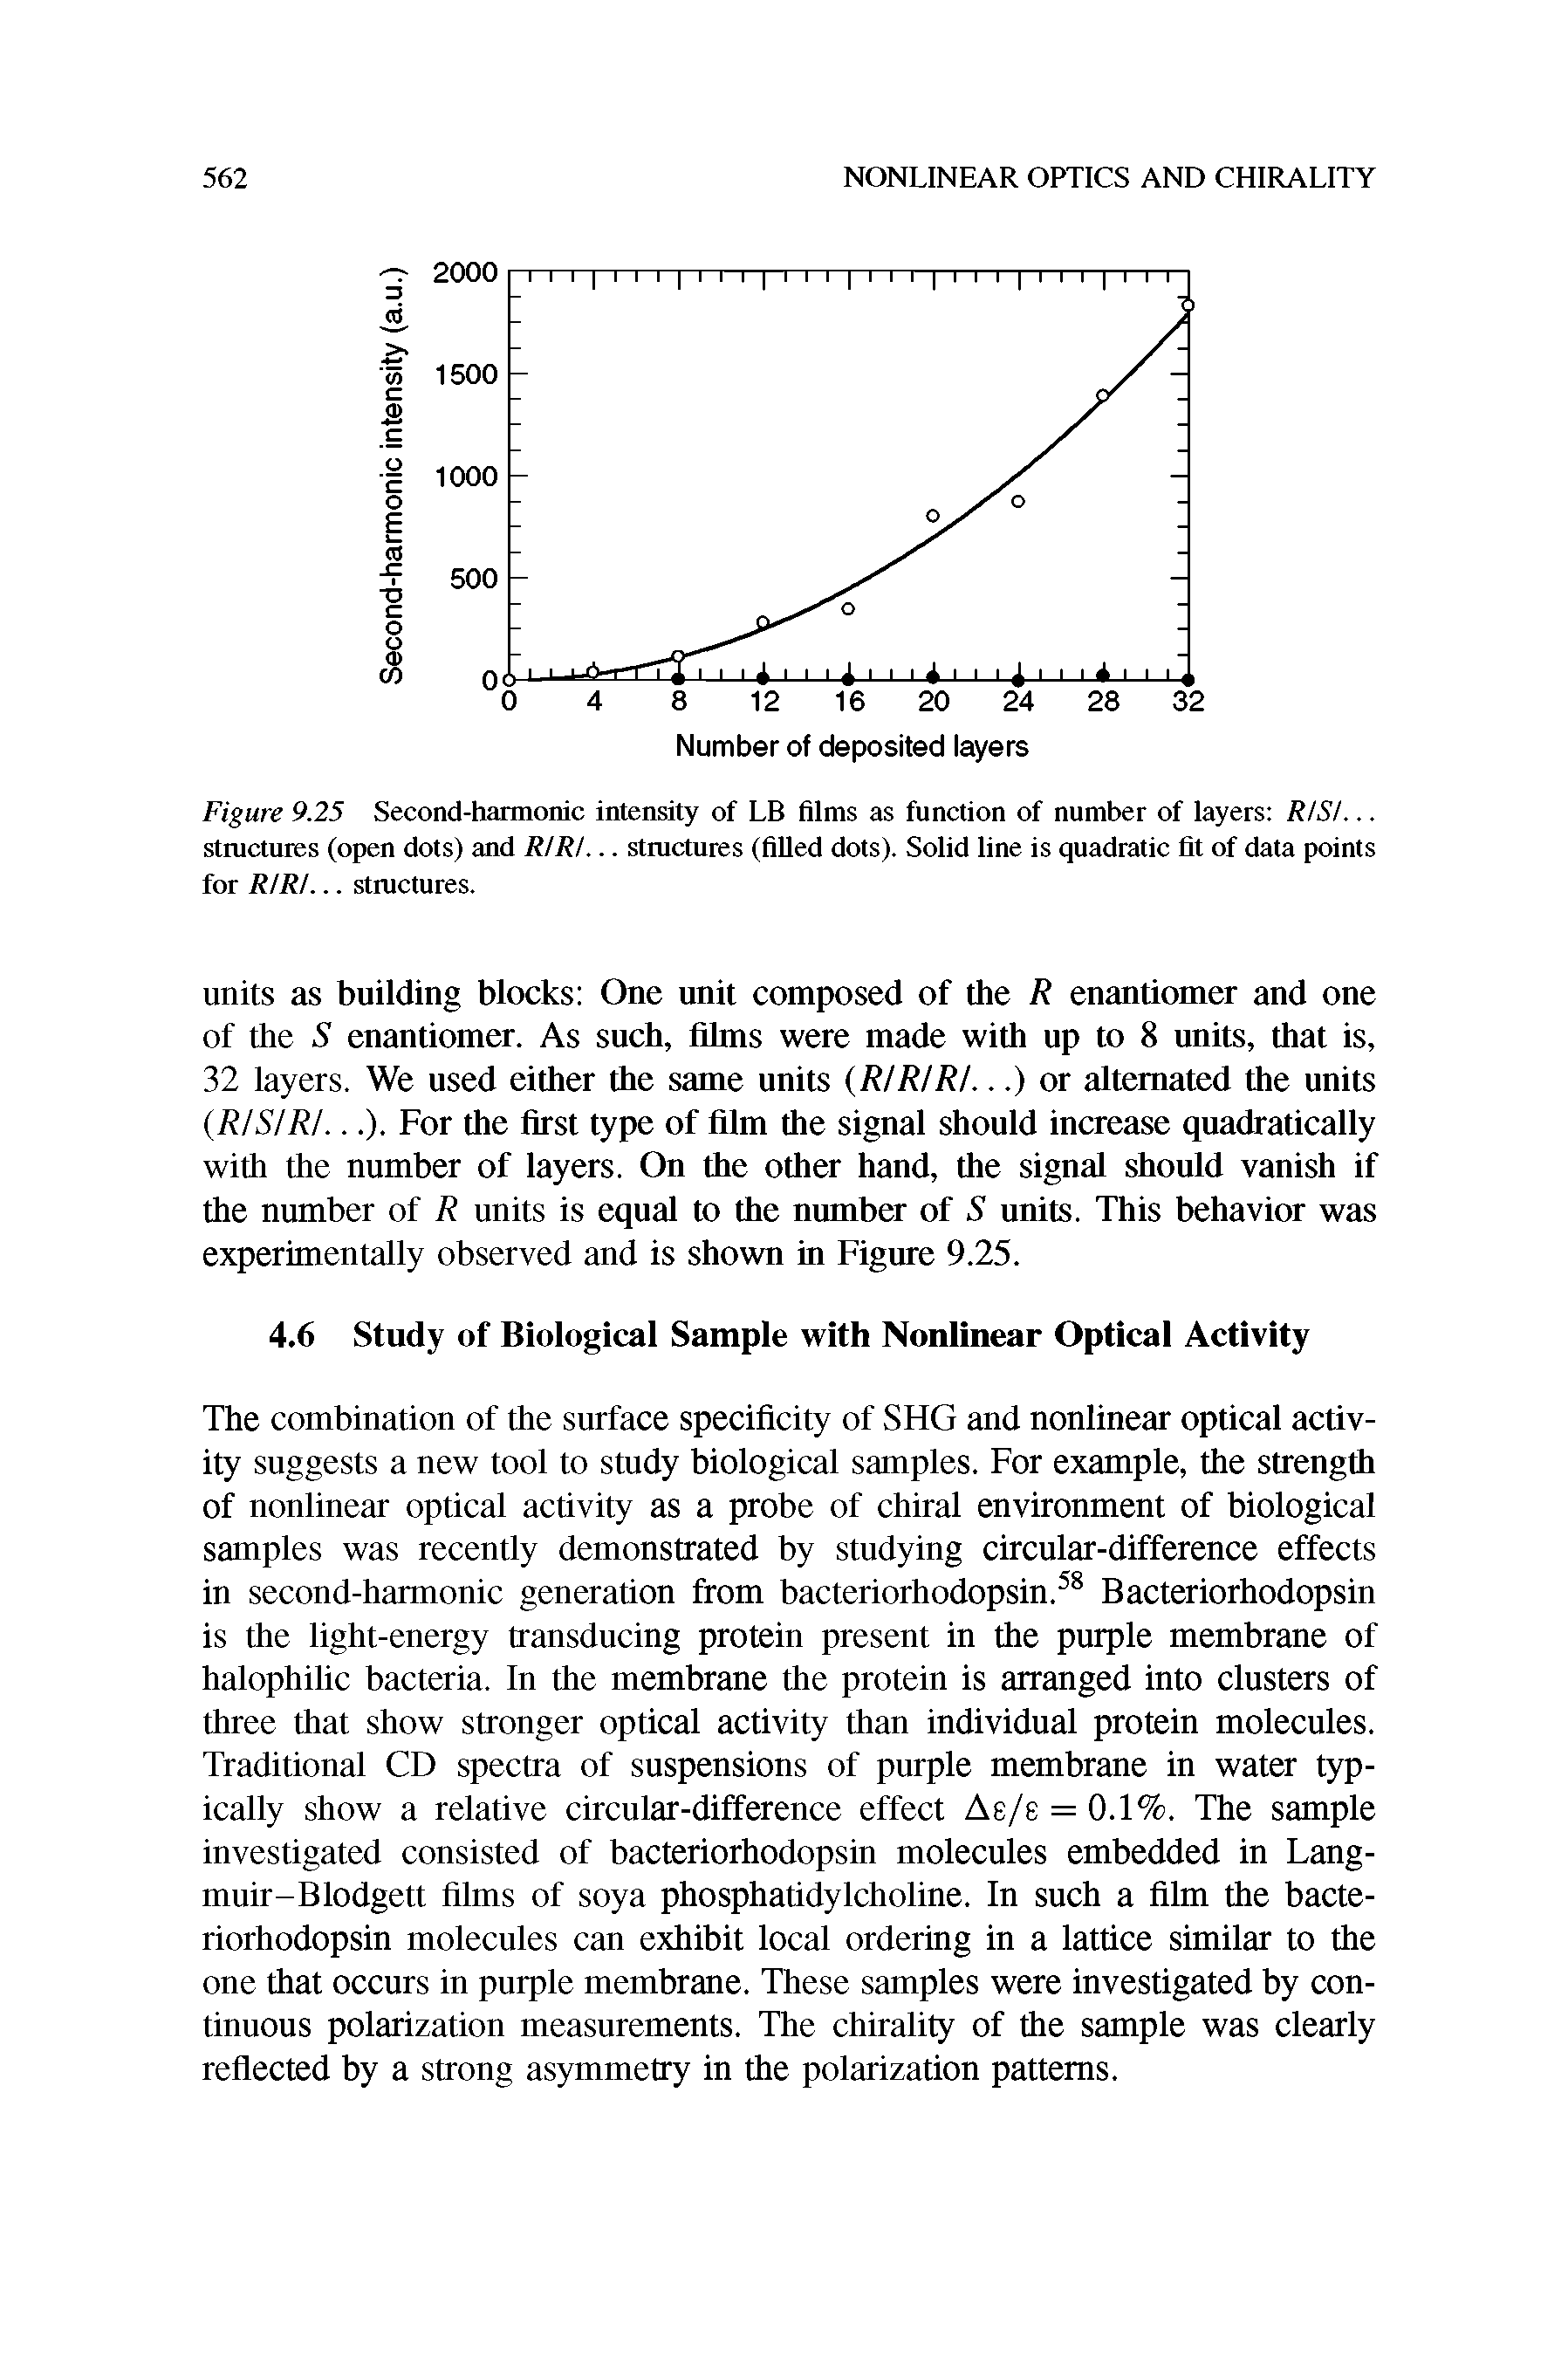 Figure 9.25 Second-harmonic intensity of LB films as function of number of layers R/S/... structures (open dots) and R/R/... stmctures (filled dots). Solid line is quadratic fit of data points for R/R/... structures.